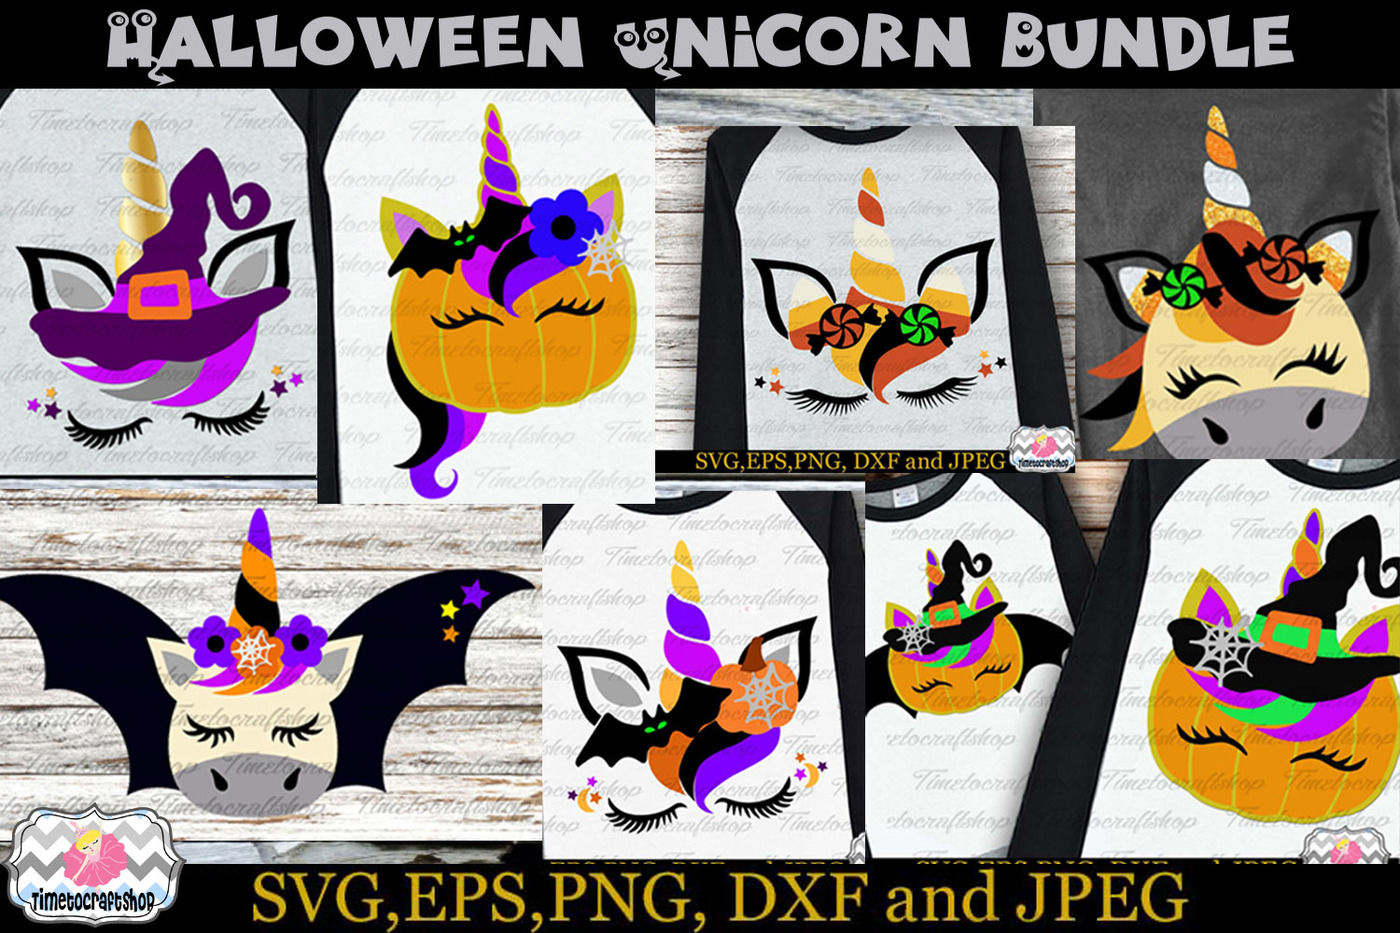 Svg Eps Dxf Png Files For Halloween Unicorn Bundle By Timetocraftshop Thehungryjpeg Com